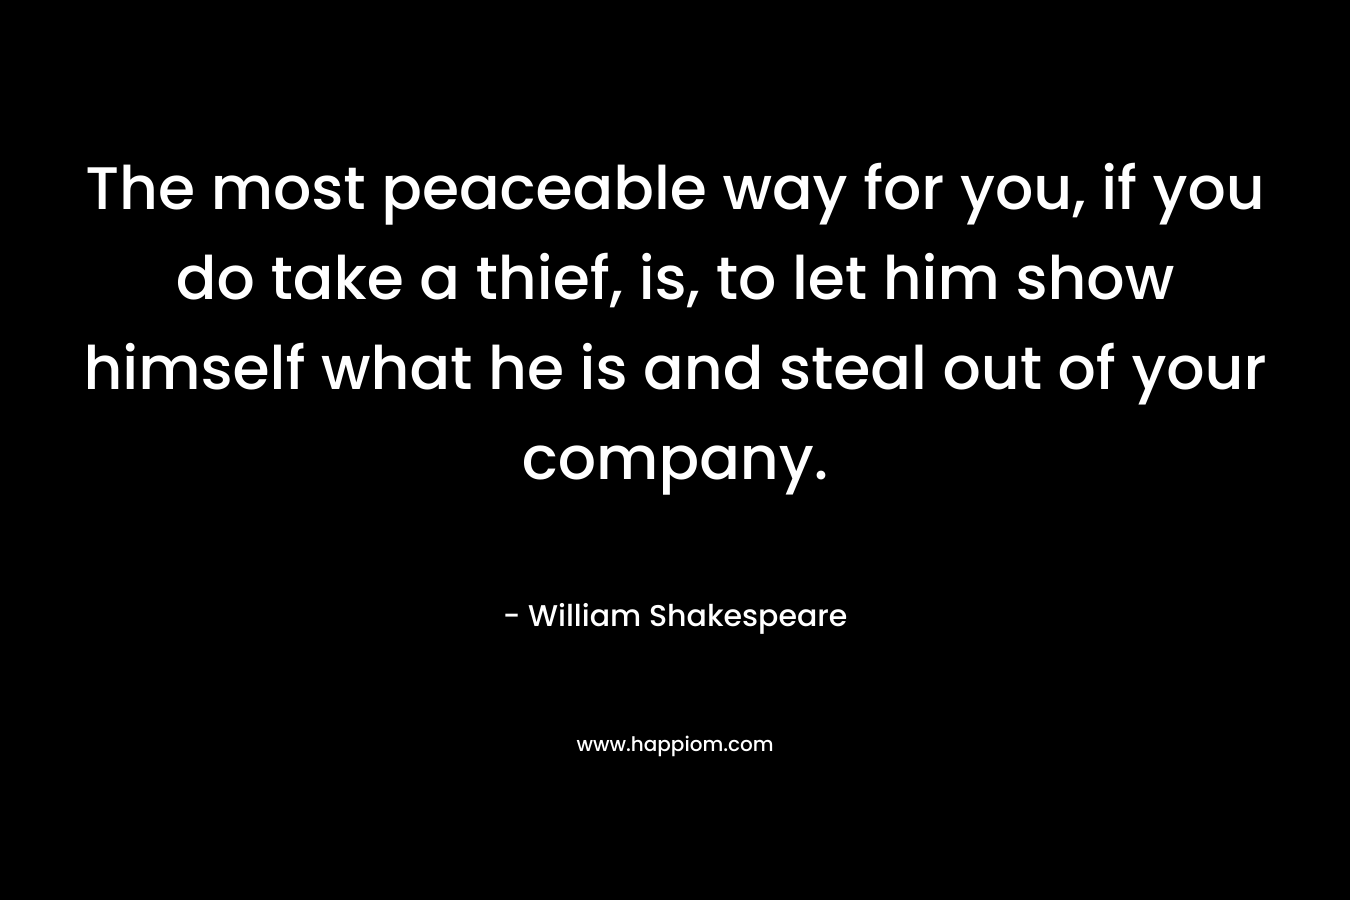 The most peaceable way for you, if you do take a thief, is, to let him show himself what he is and steal out of your company. – William Shakespeare